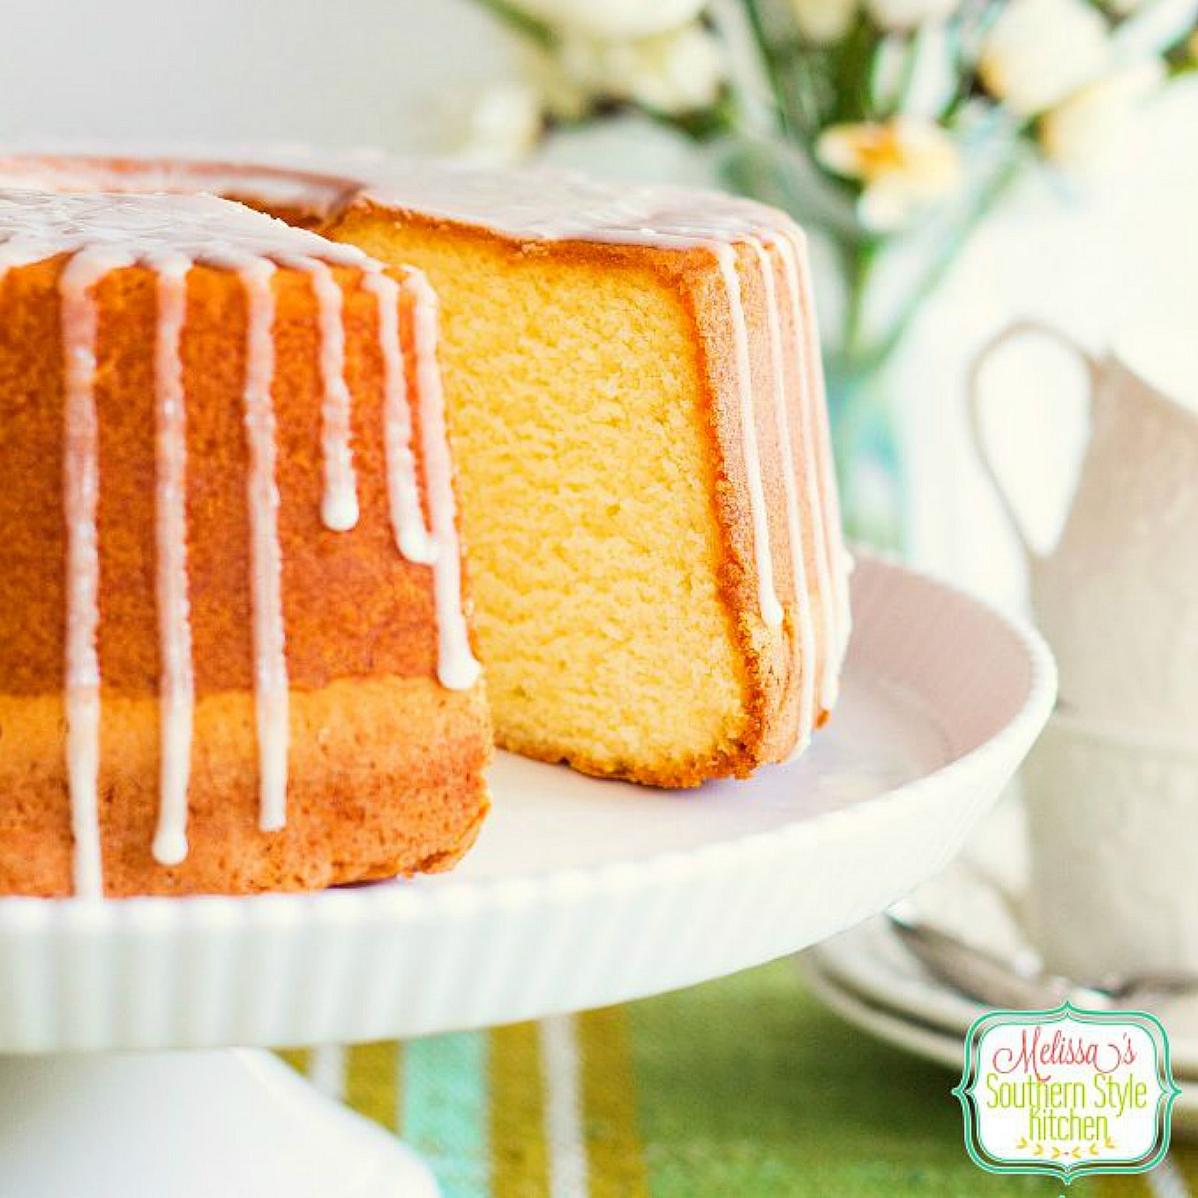  Moist and tangy, this pound cake will brighten up your taste buds.